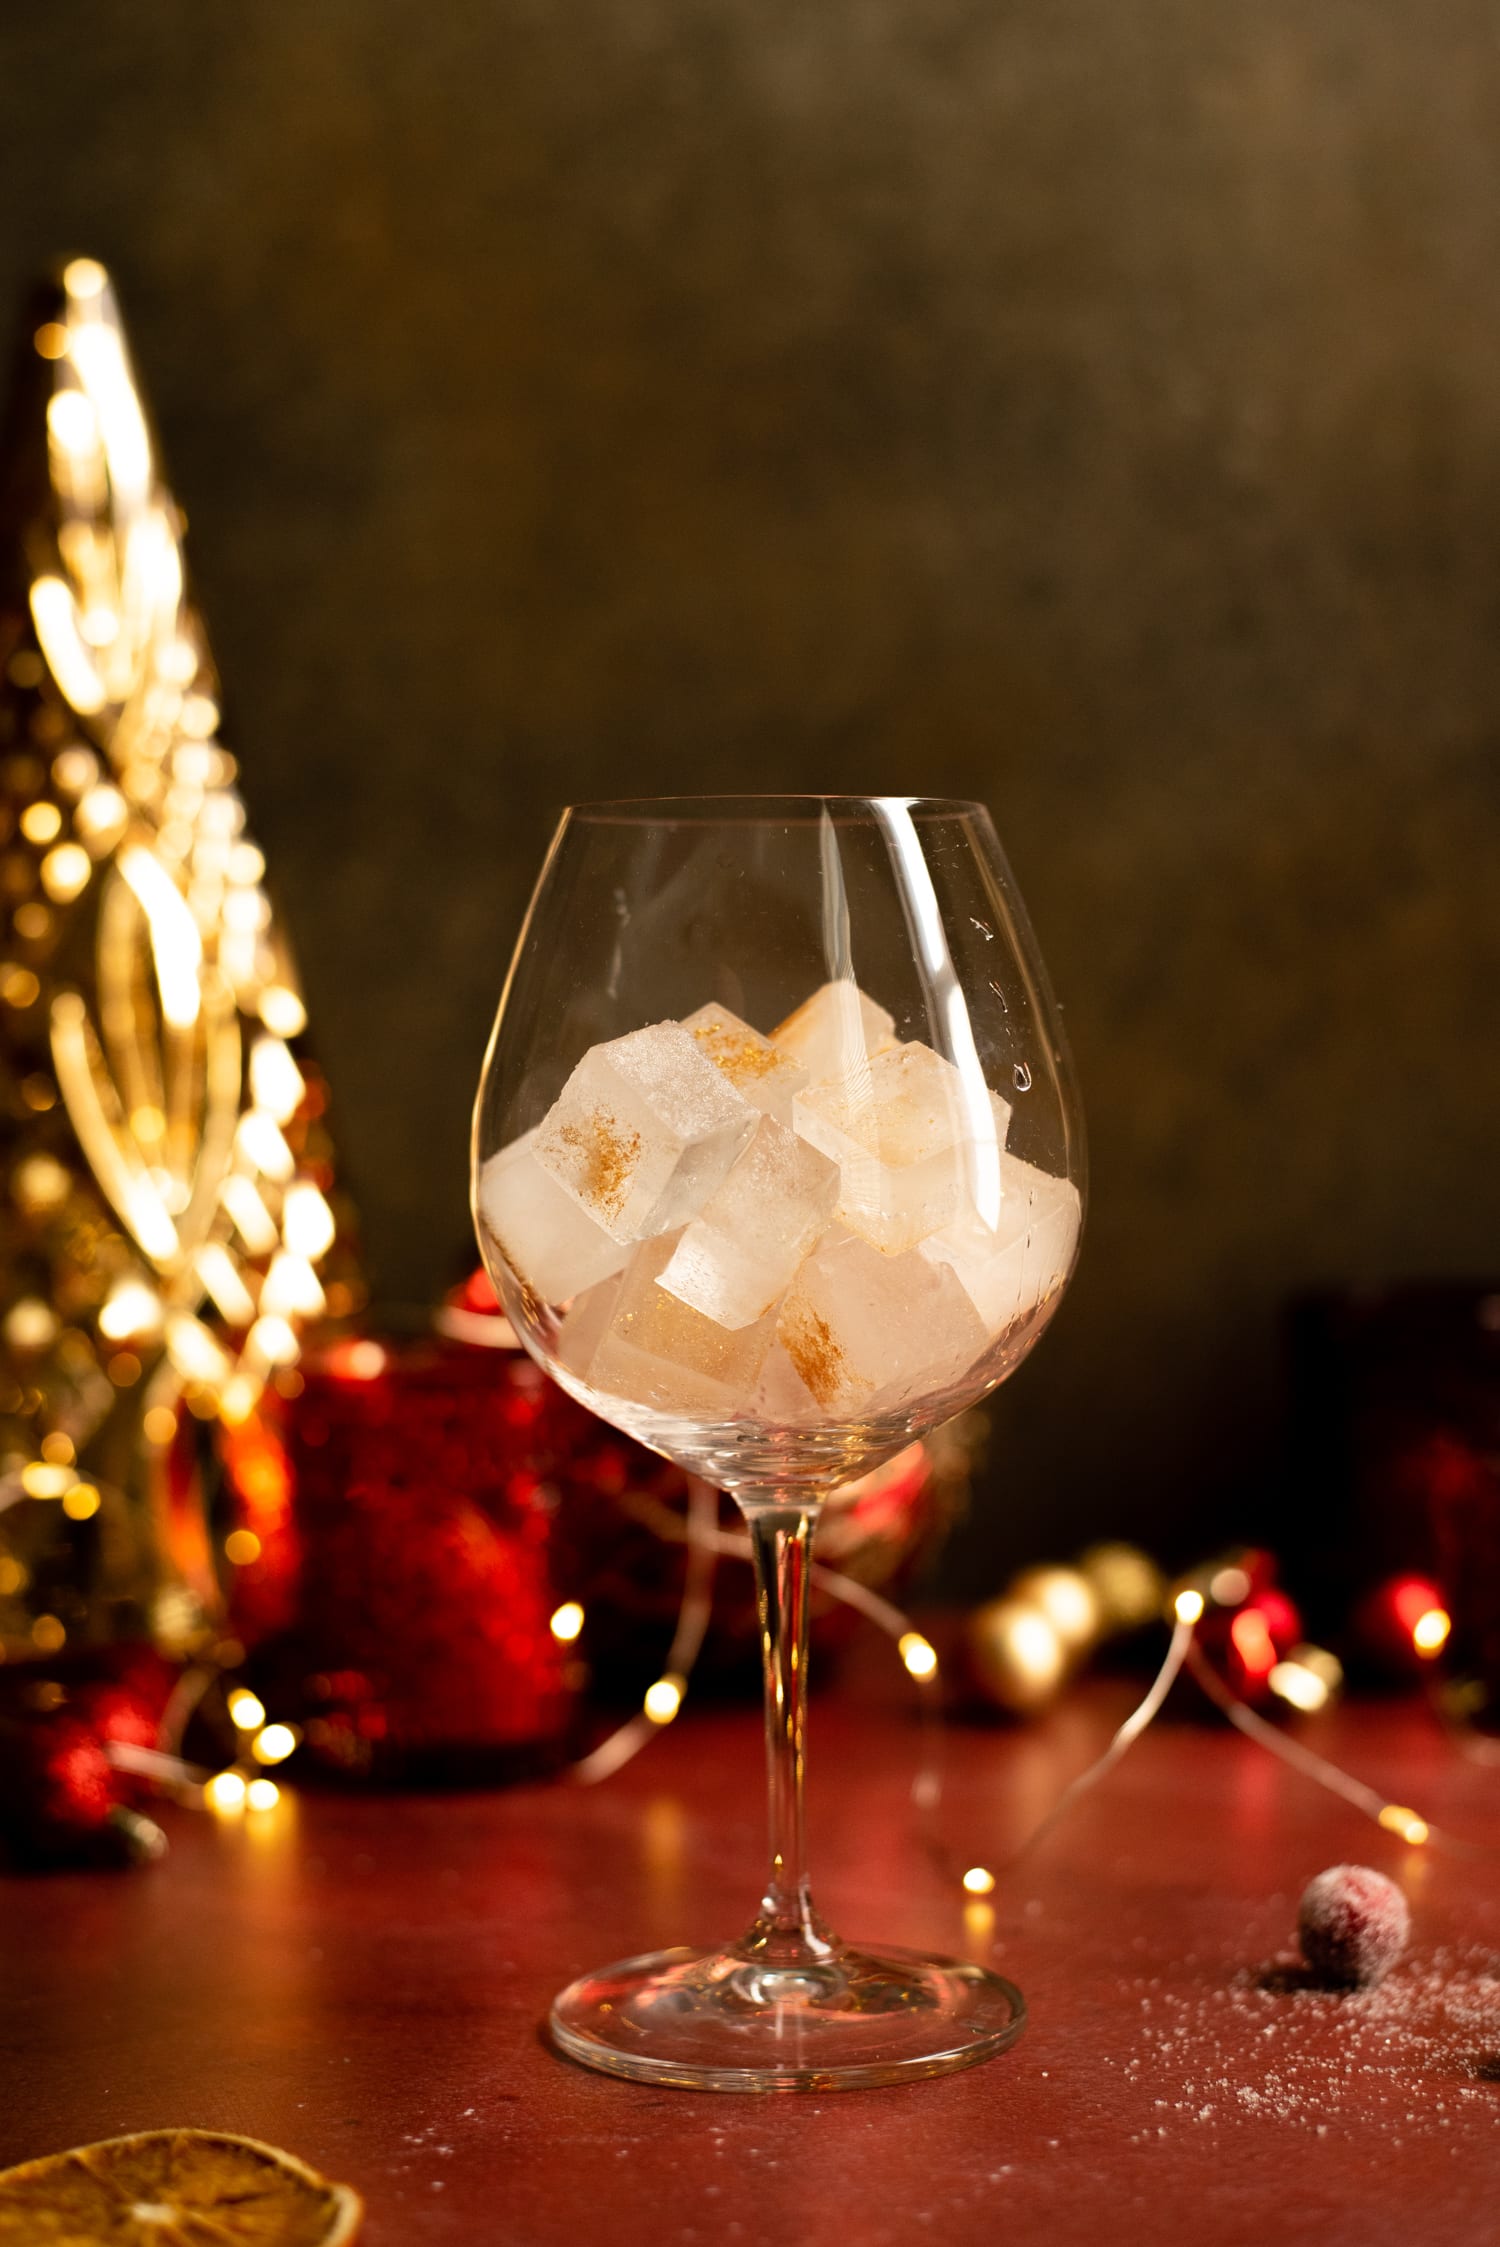 Gold glitter ice sitting in a large wine glass on a red table and surrounded by ornaments.